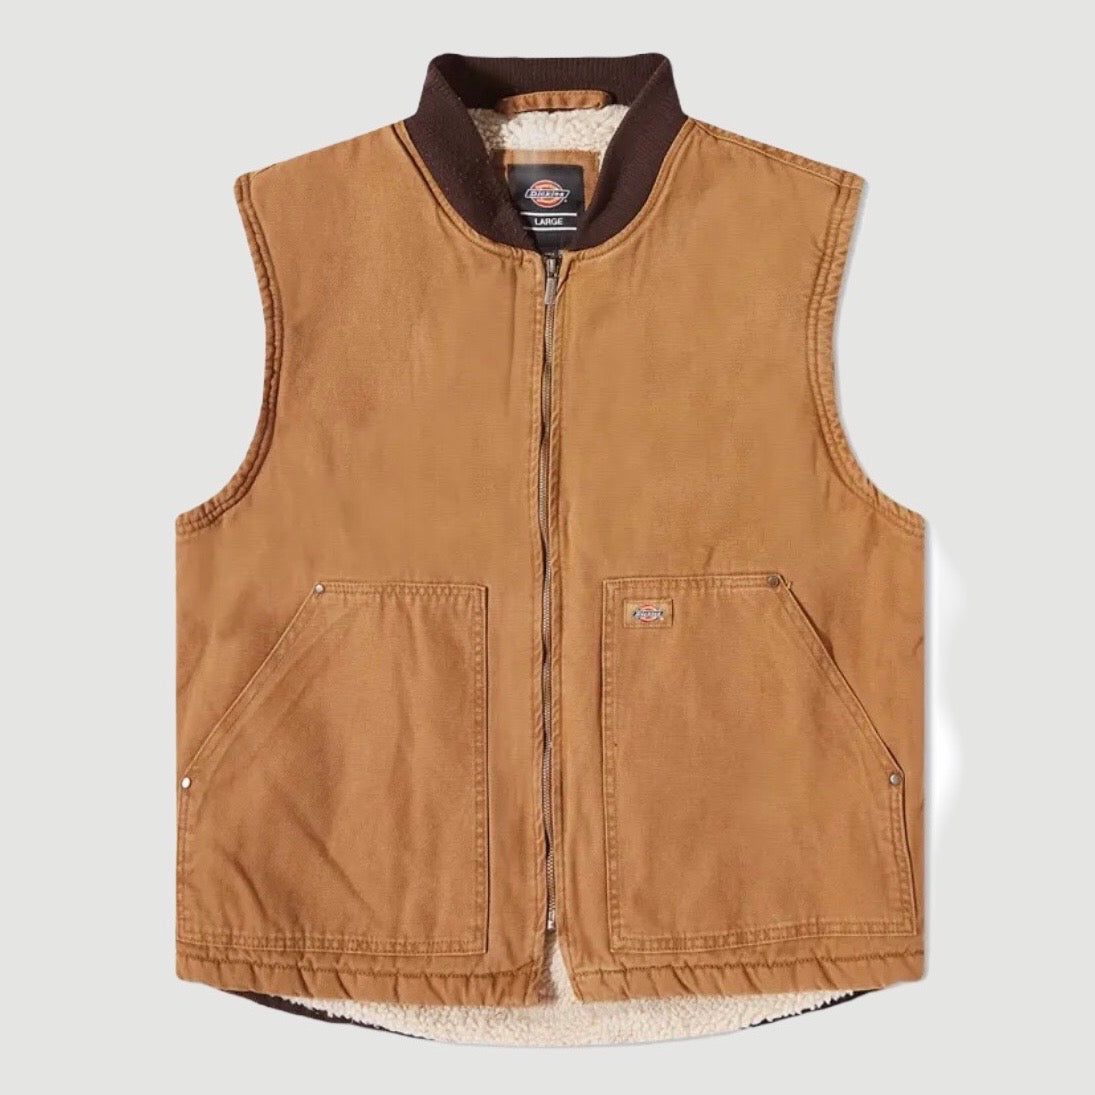 Stonewashed Duck High Pile Fleece Lined Vest Stonewashed Brown Duck